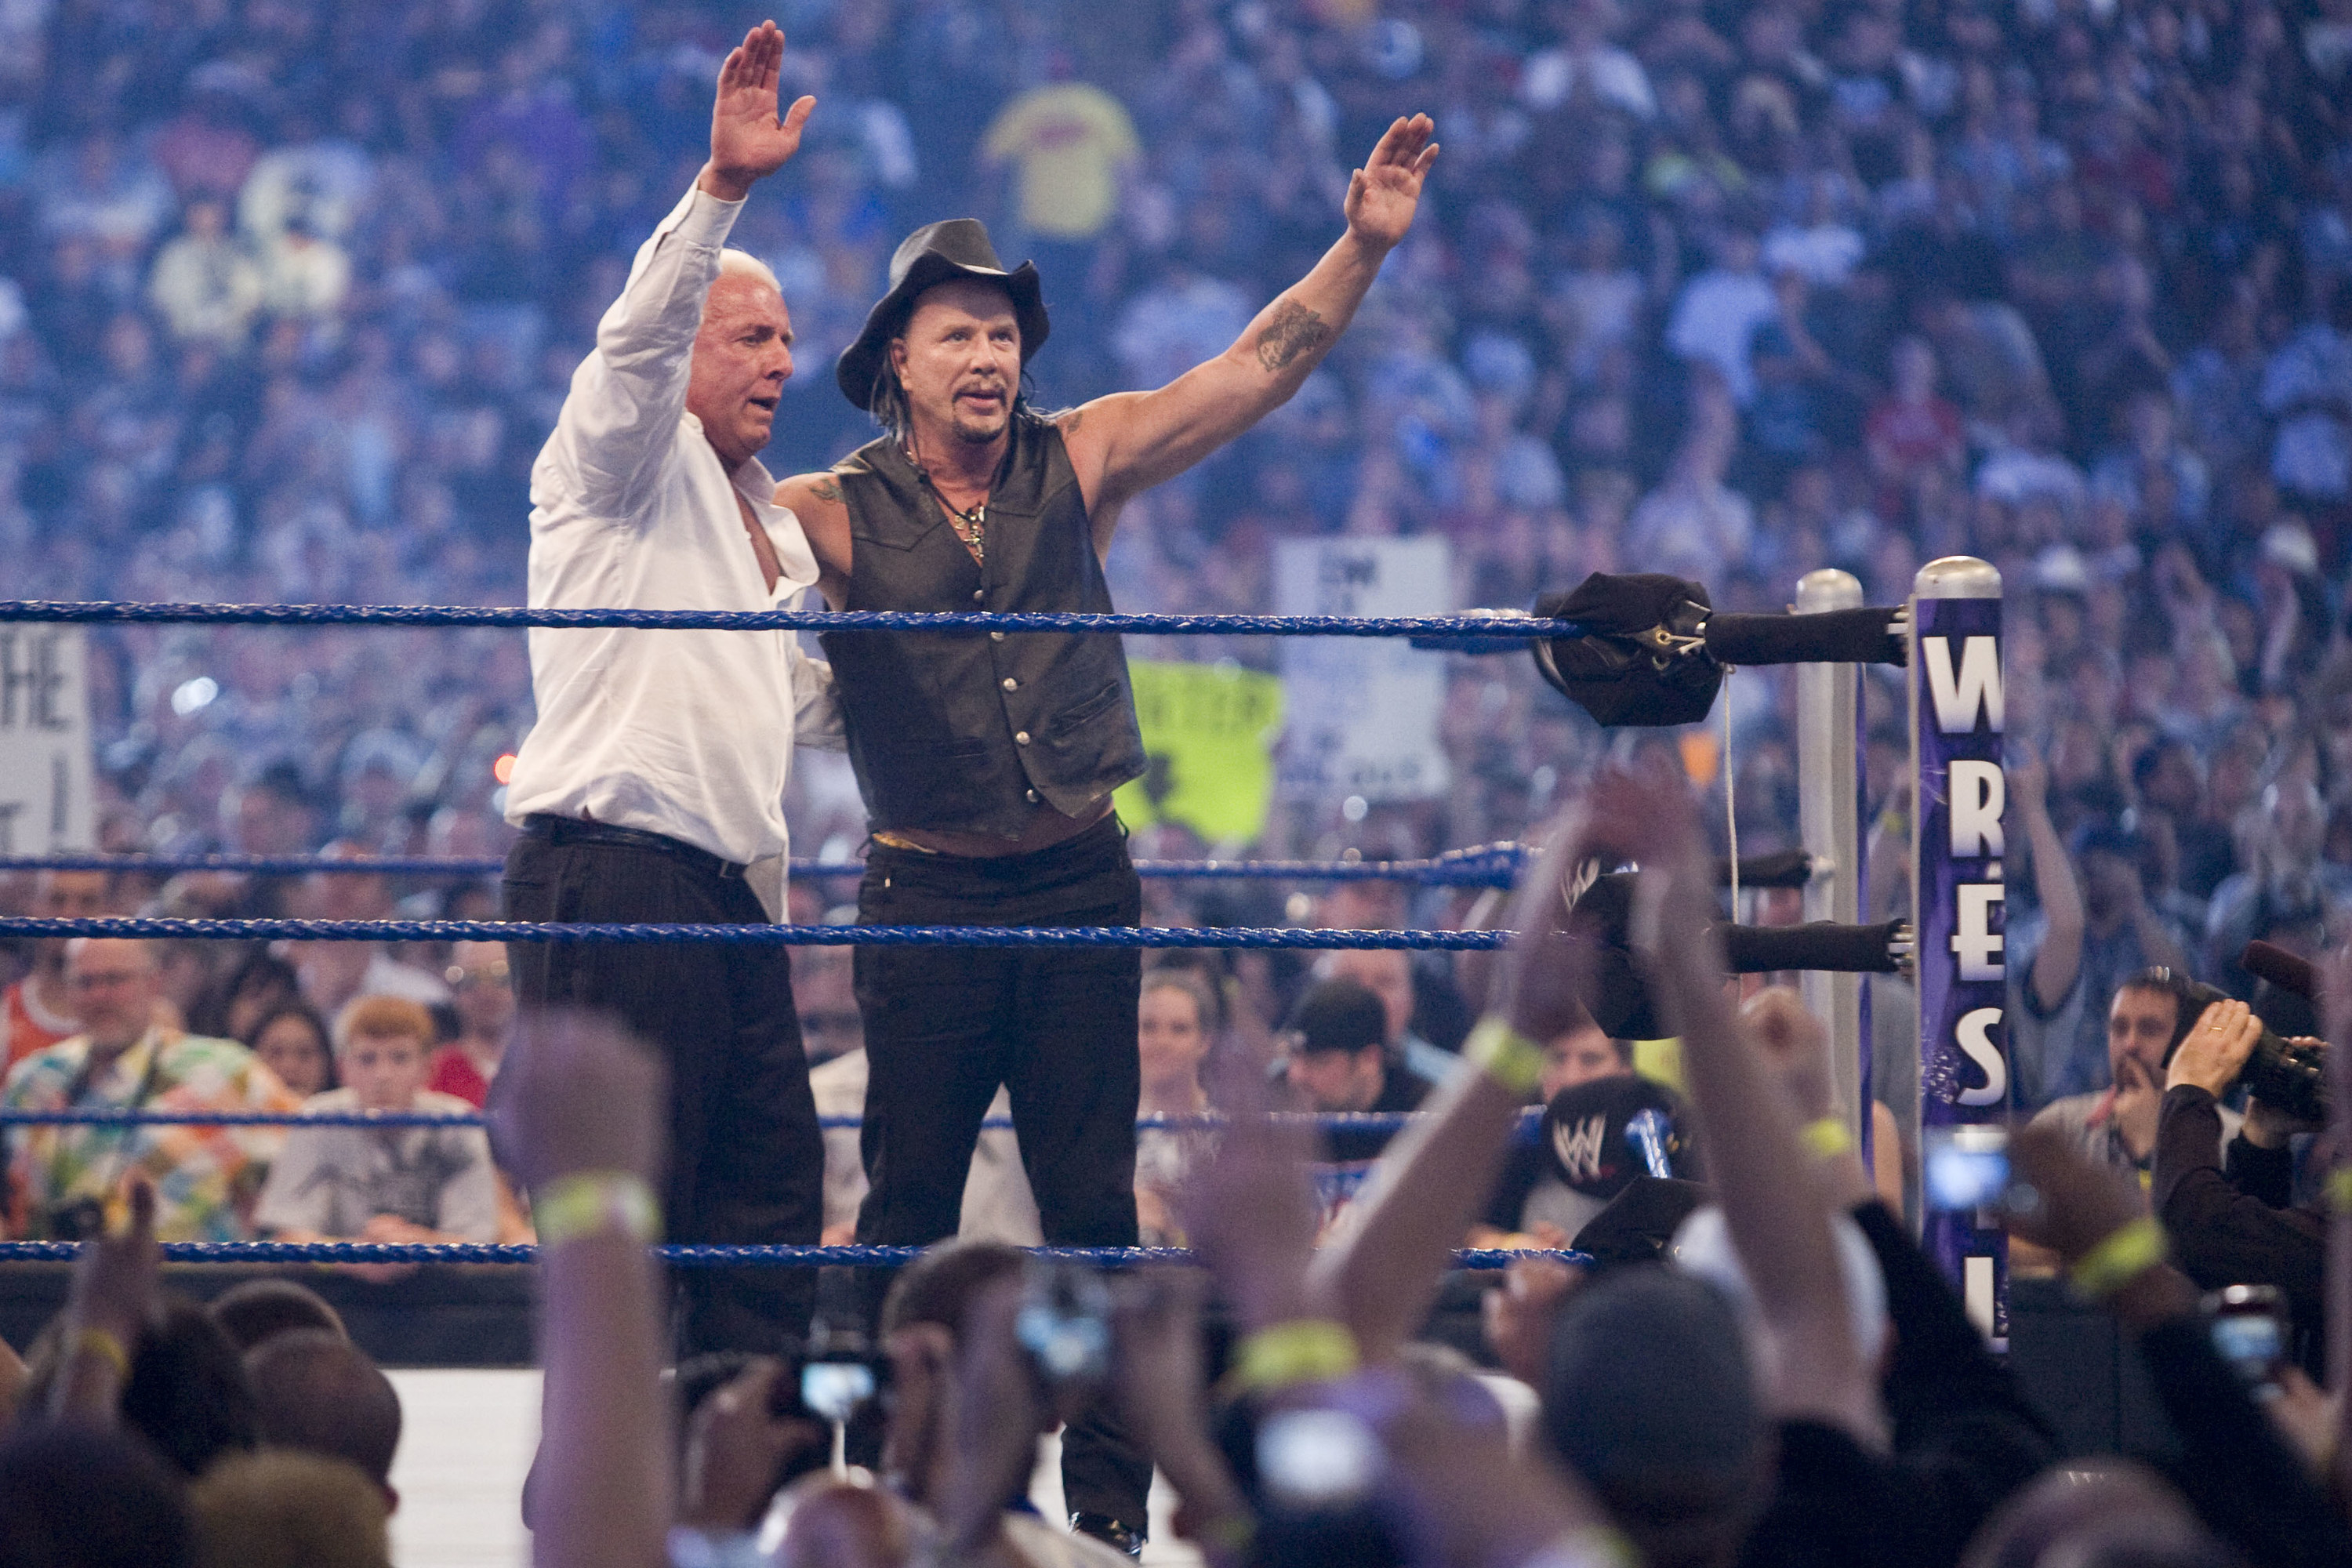 Actor Mickey Rourke celebrates with Ric Flair after beating WWE Superstar Chris Jericho during WrestleMania 25 at Reliant Stadium on April 5, 2009 in Houston, Texas